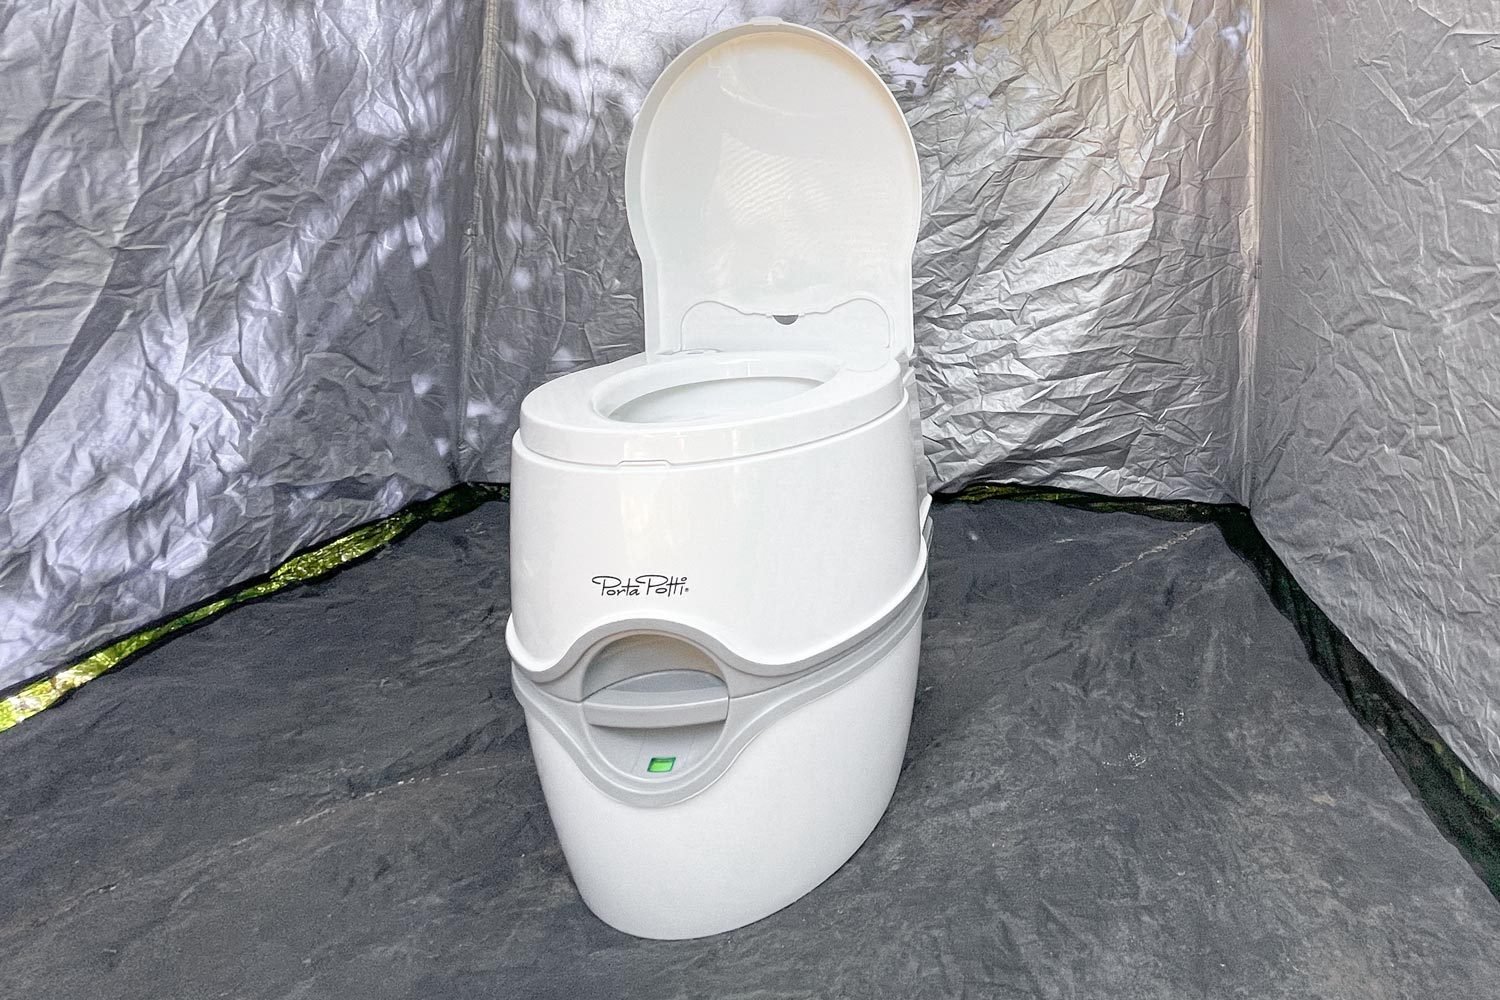 https://www.familyhandyman.com/wp-content/uploads/2023/09/PortaPotty3-Karuna-Eberl-for-FHM-Resize-Recolor-Crop-DH-FHM-What-to-Know-about-Portable-Toilets.jpg